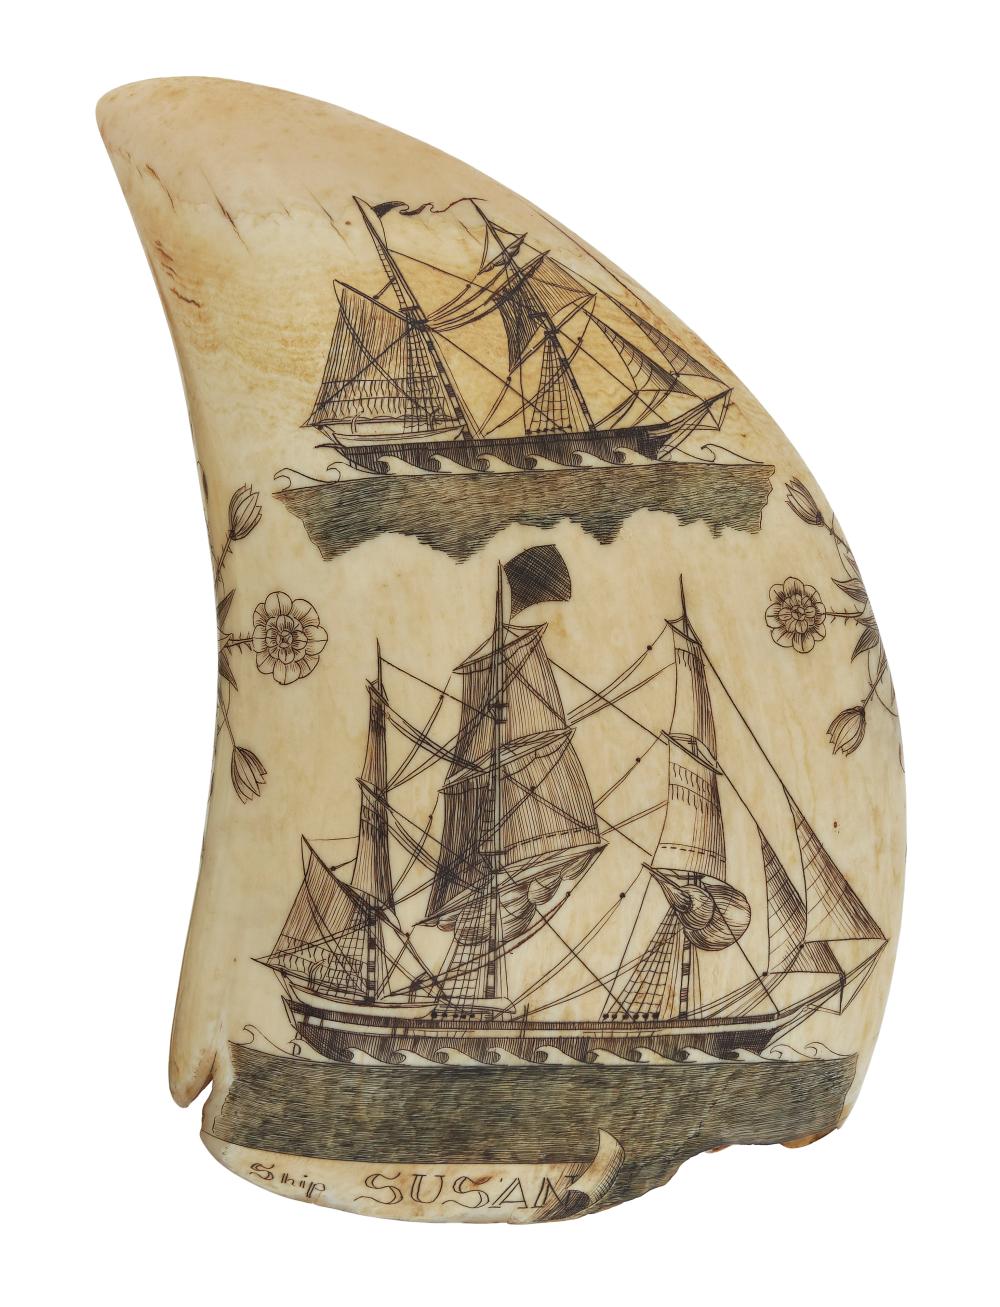  POLYCHROME ENGRAVED WHALE S 350203